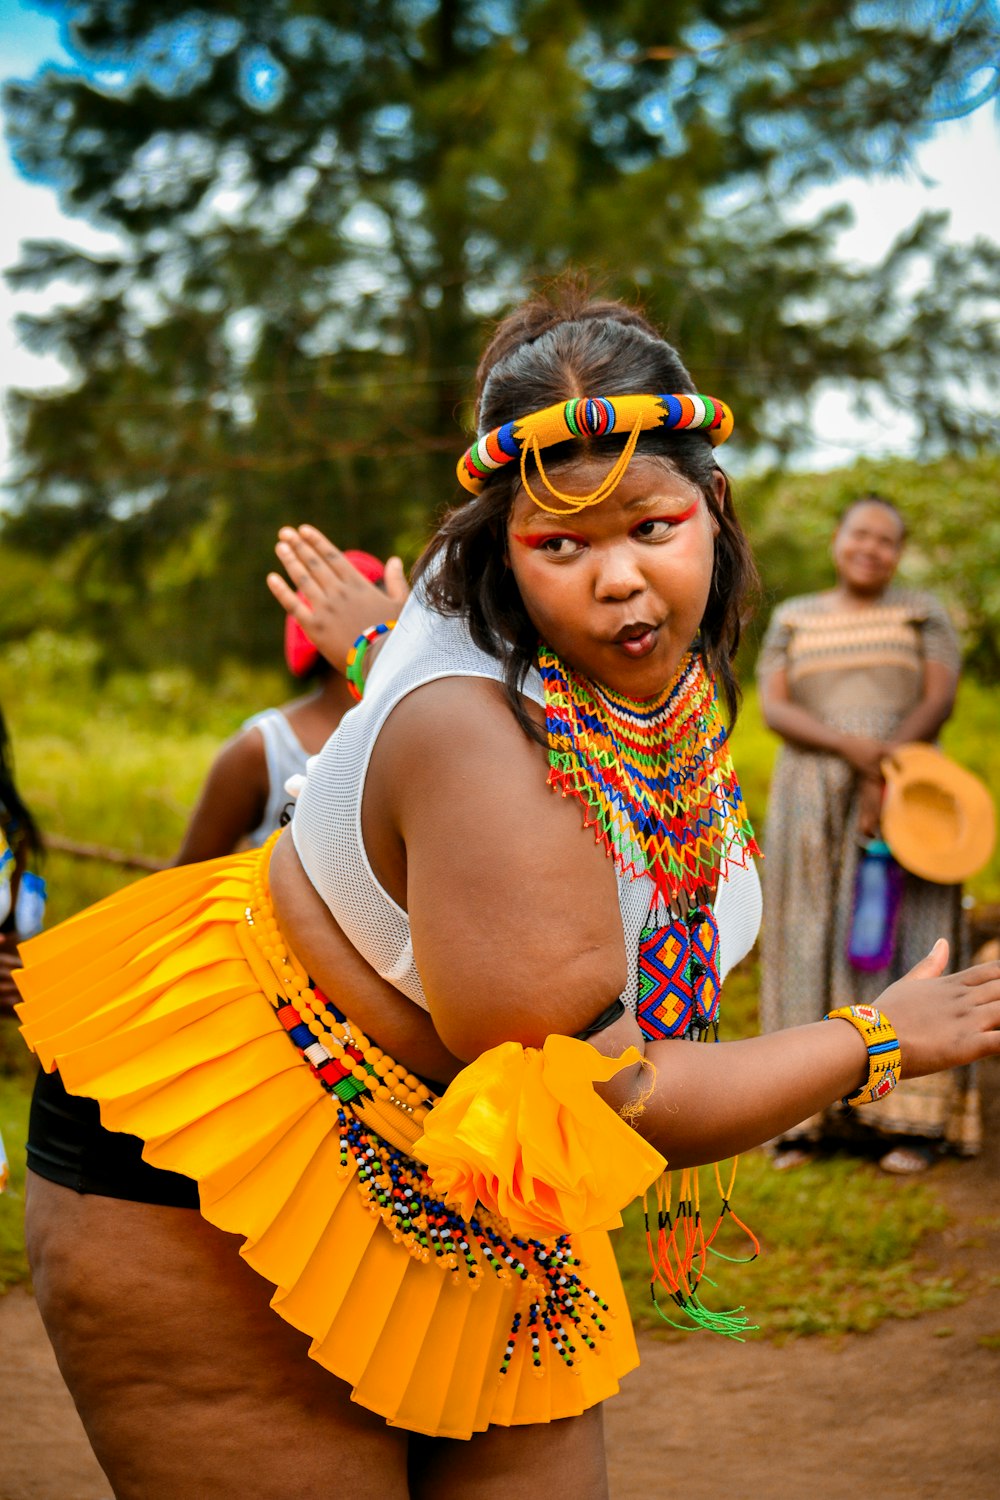 a woman in a yellow skirt is dancing